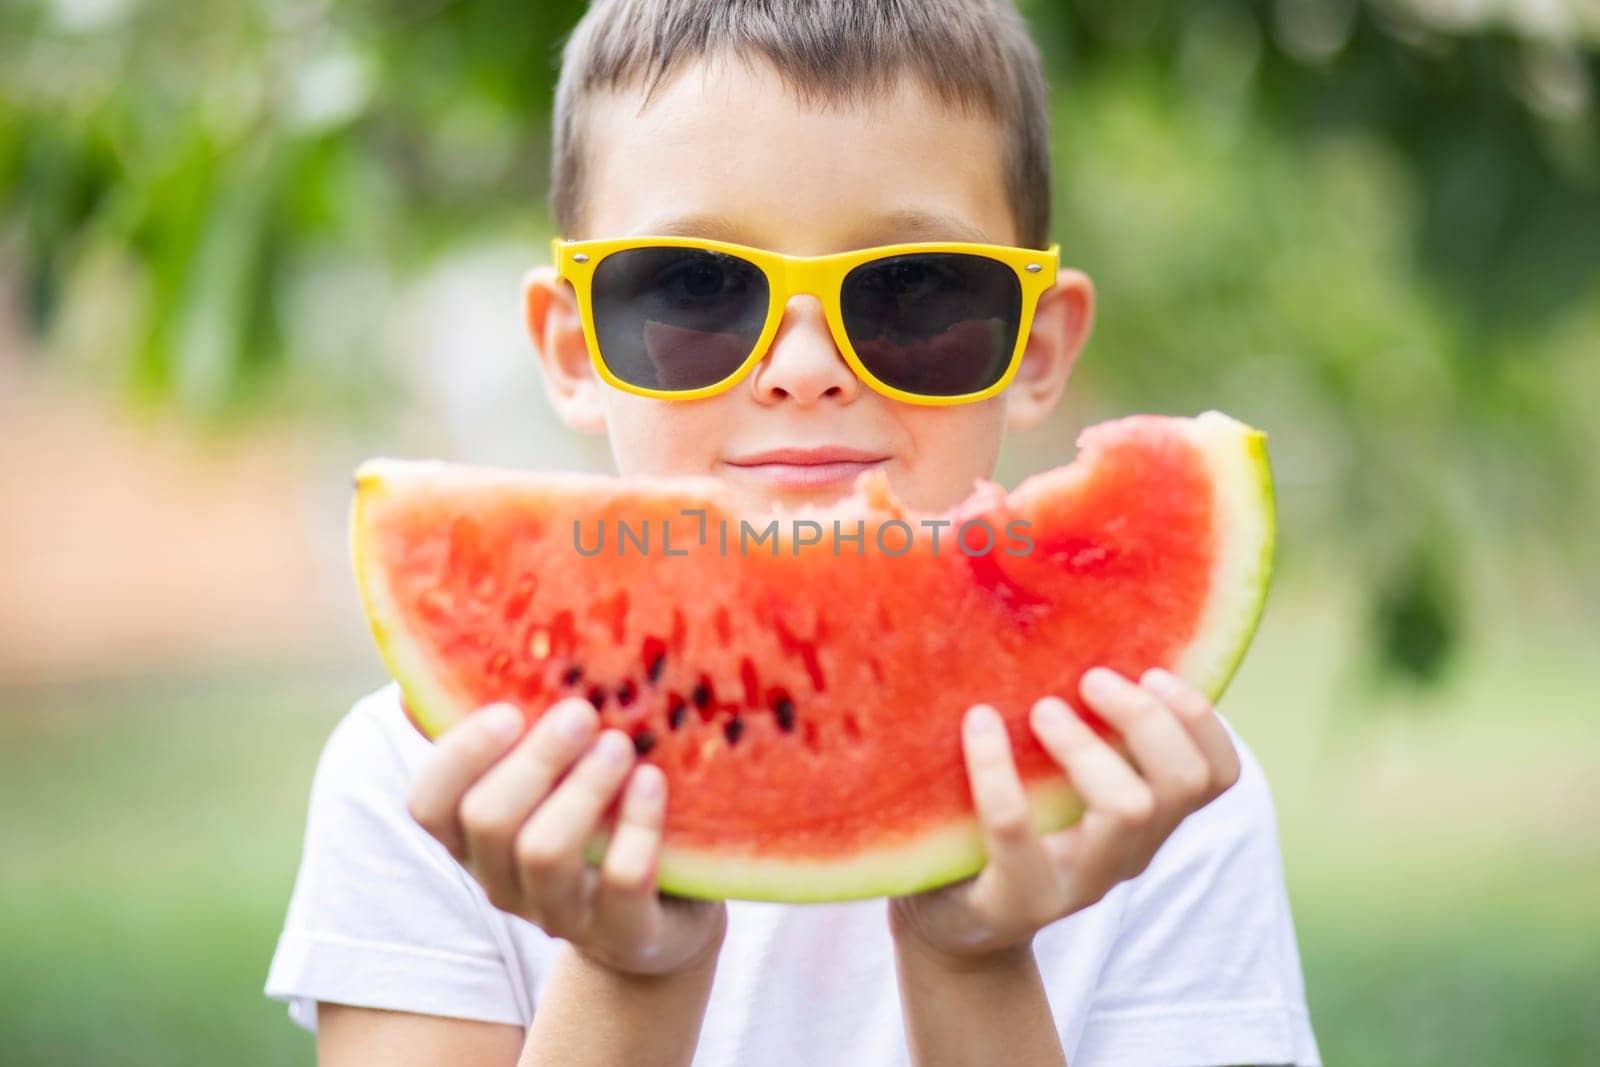 Cute boy in yellow sunglasses eating watermelon outdoors in summer. Healthy eating seasonal berries and fruits.